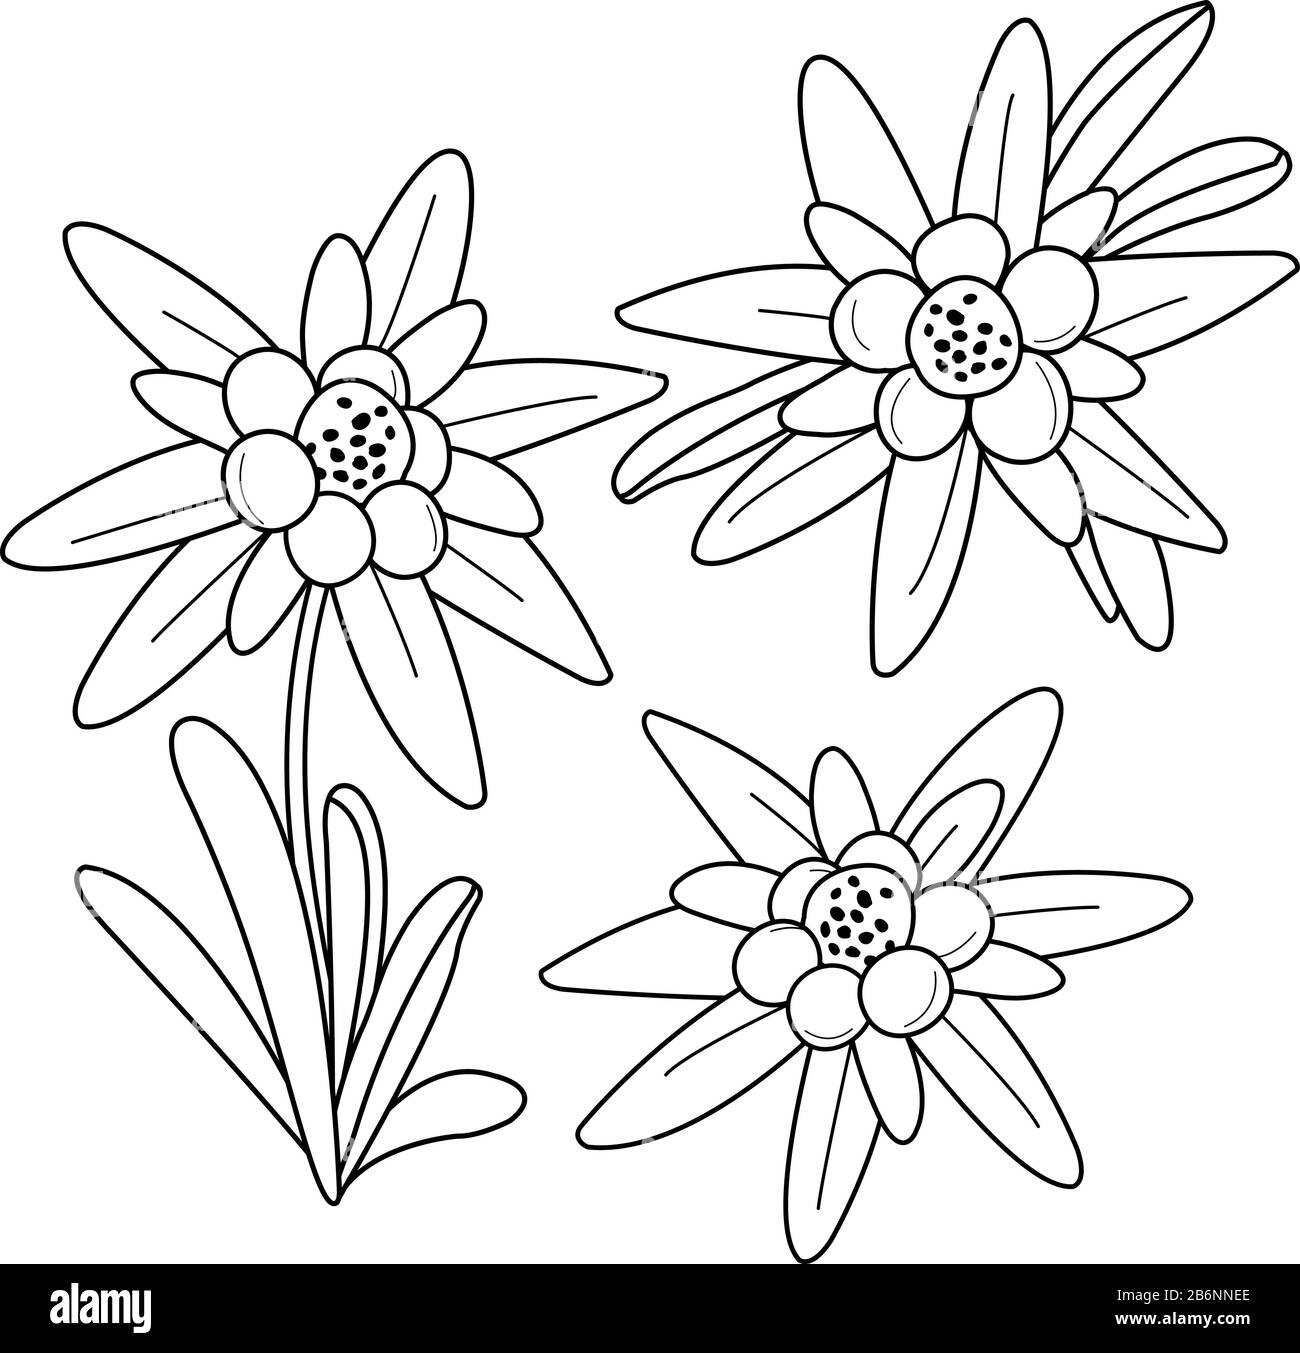 Edelweiss flowers. Black and white coloring book page Stock Vector